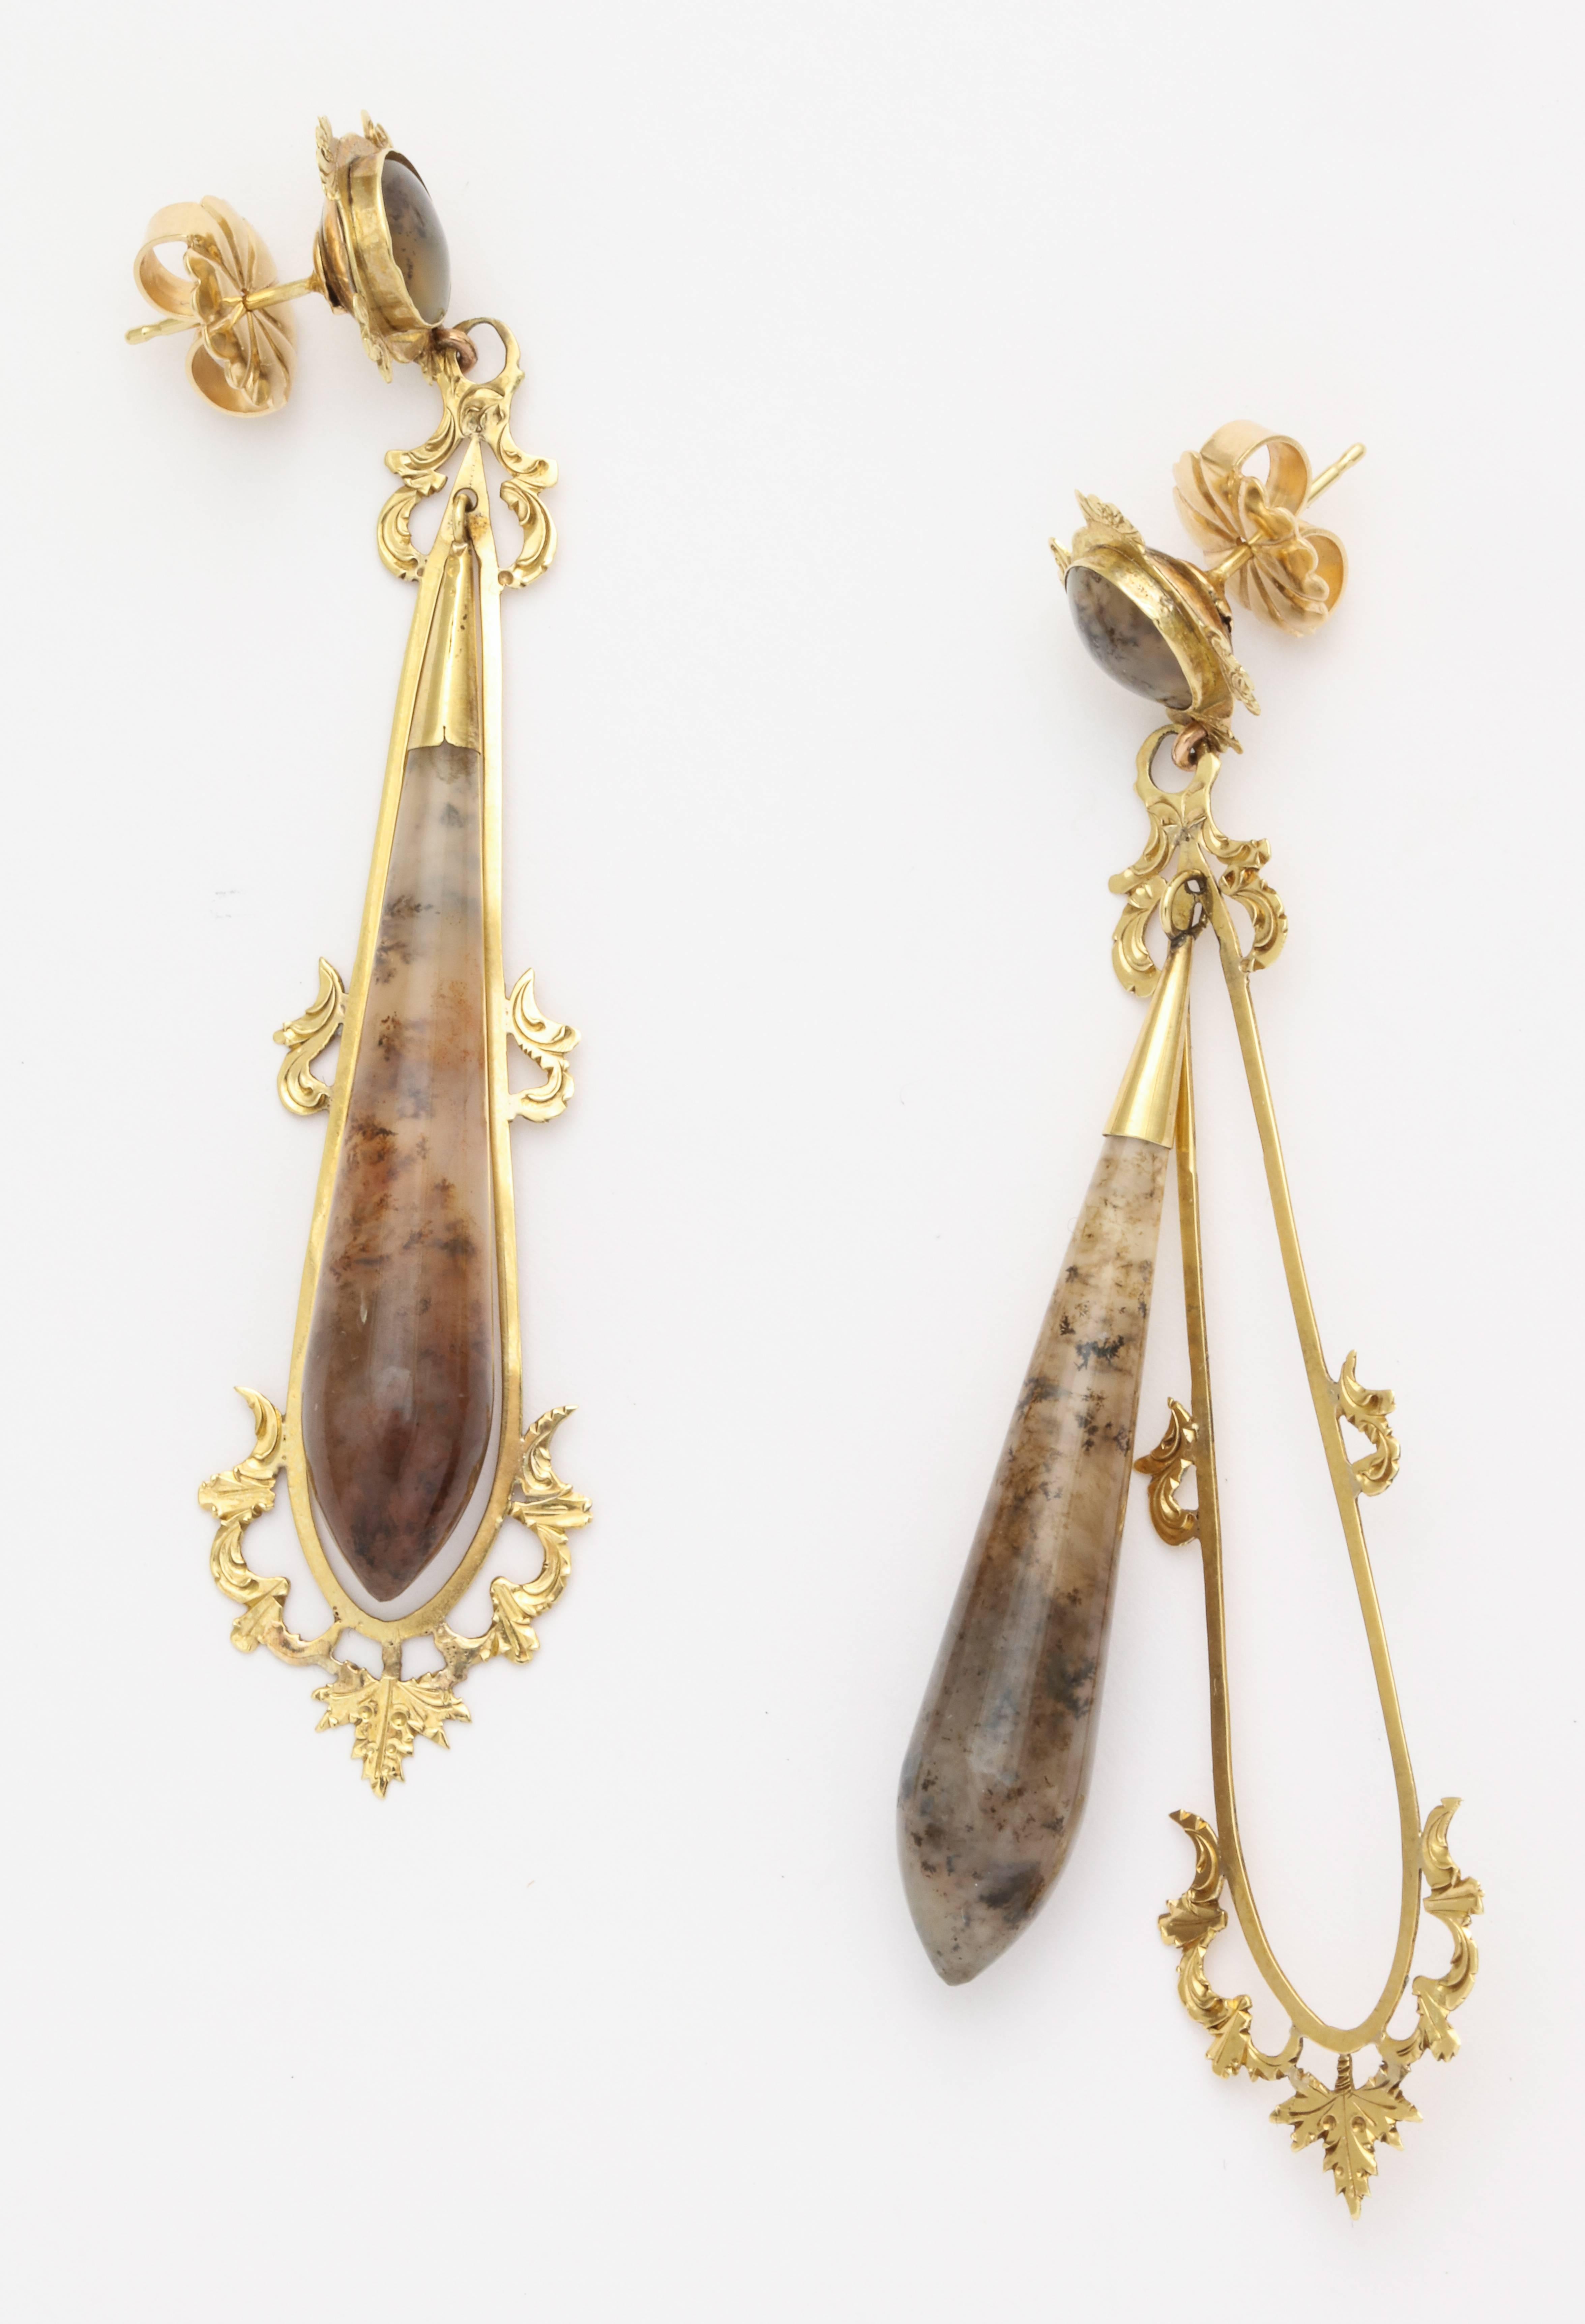 A pair of Victorian-era earrings with moss agate drops, surrounded by 14 karat yellow gold frames featuring intricate engraving and filigree work. Circa late 1800s.